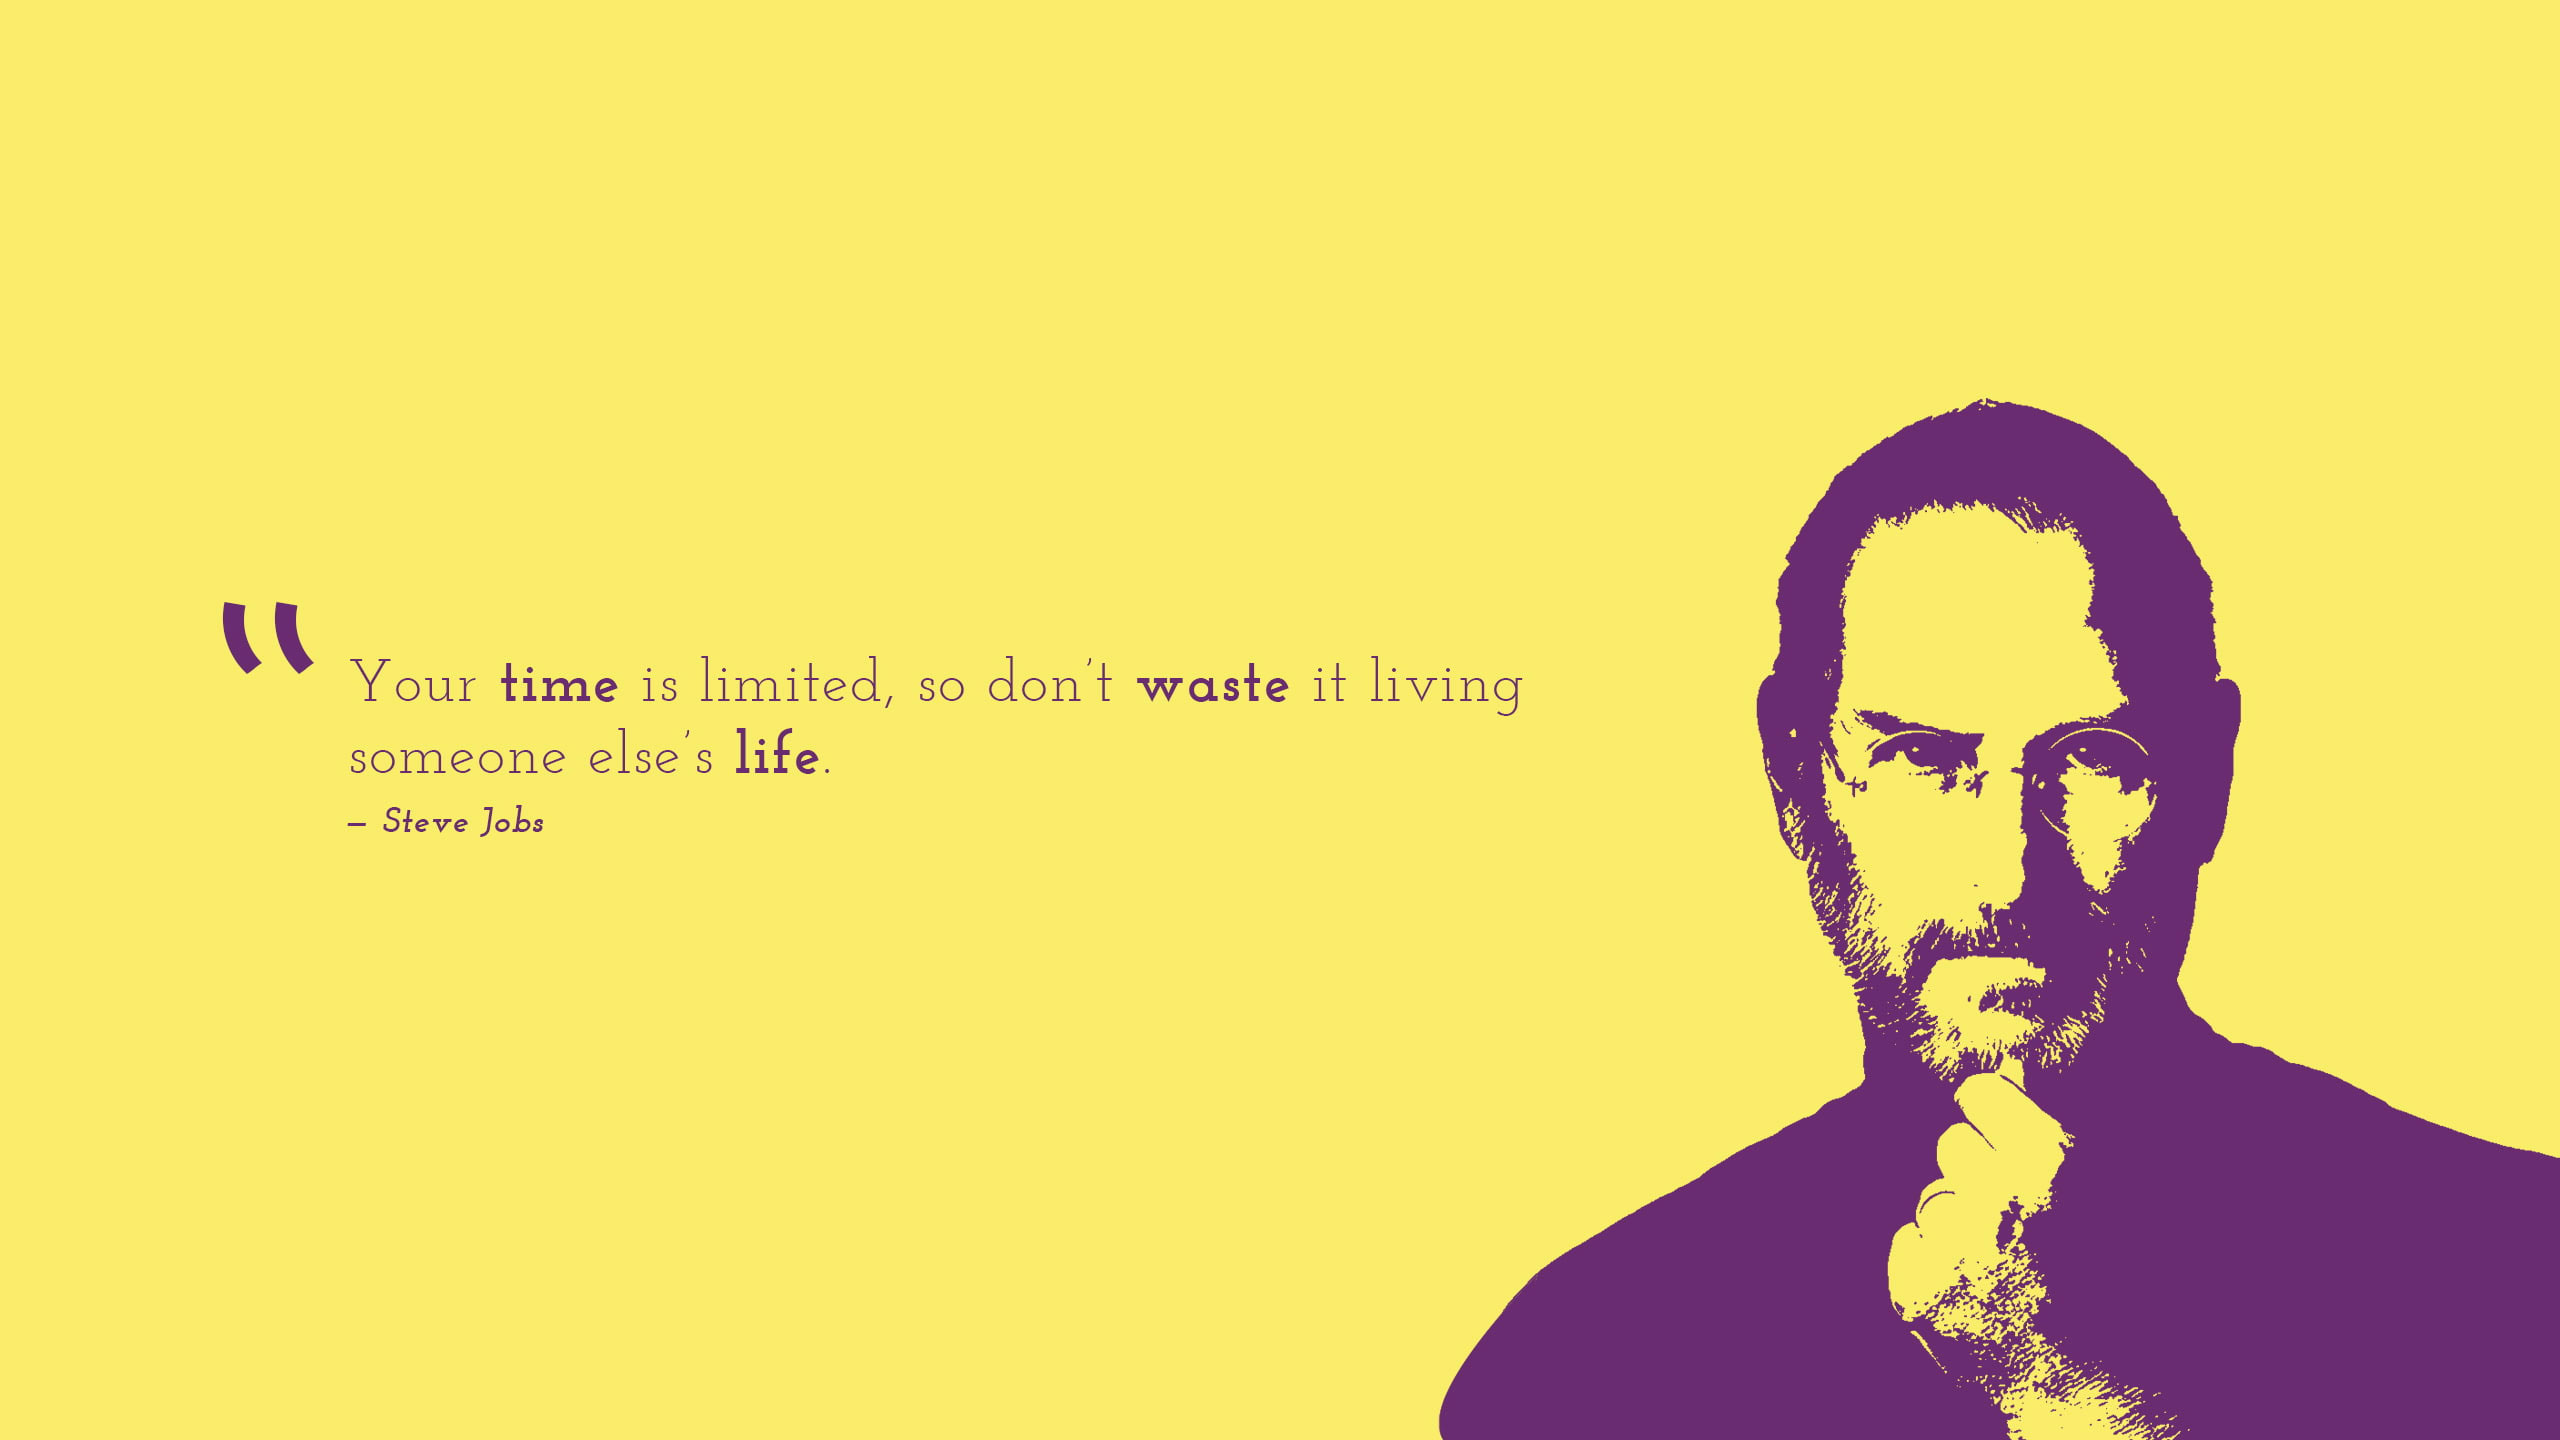 Wallpaper Steve Jobs Illustration With Quote Letter, Time